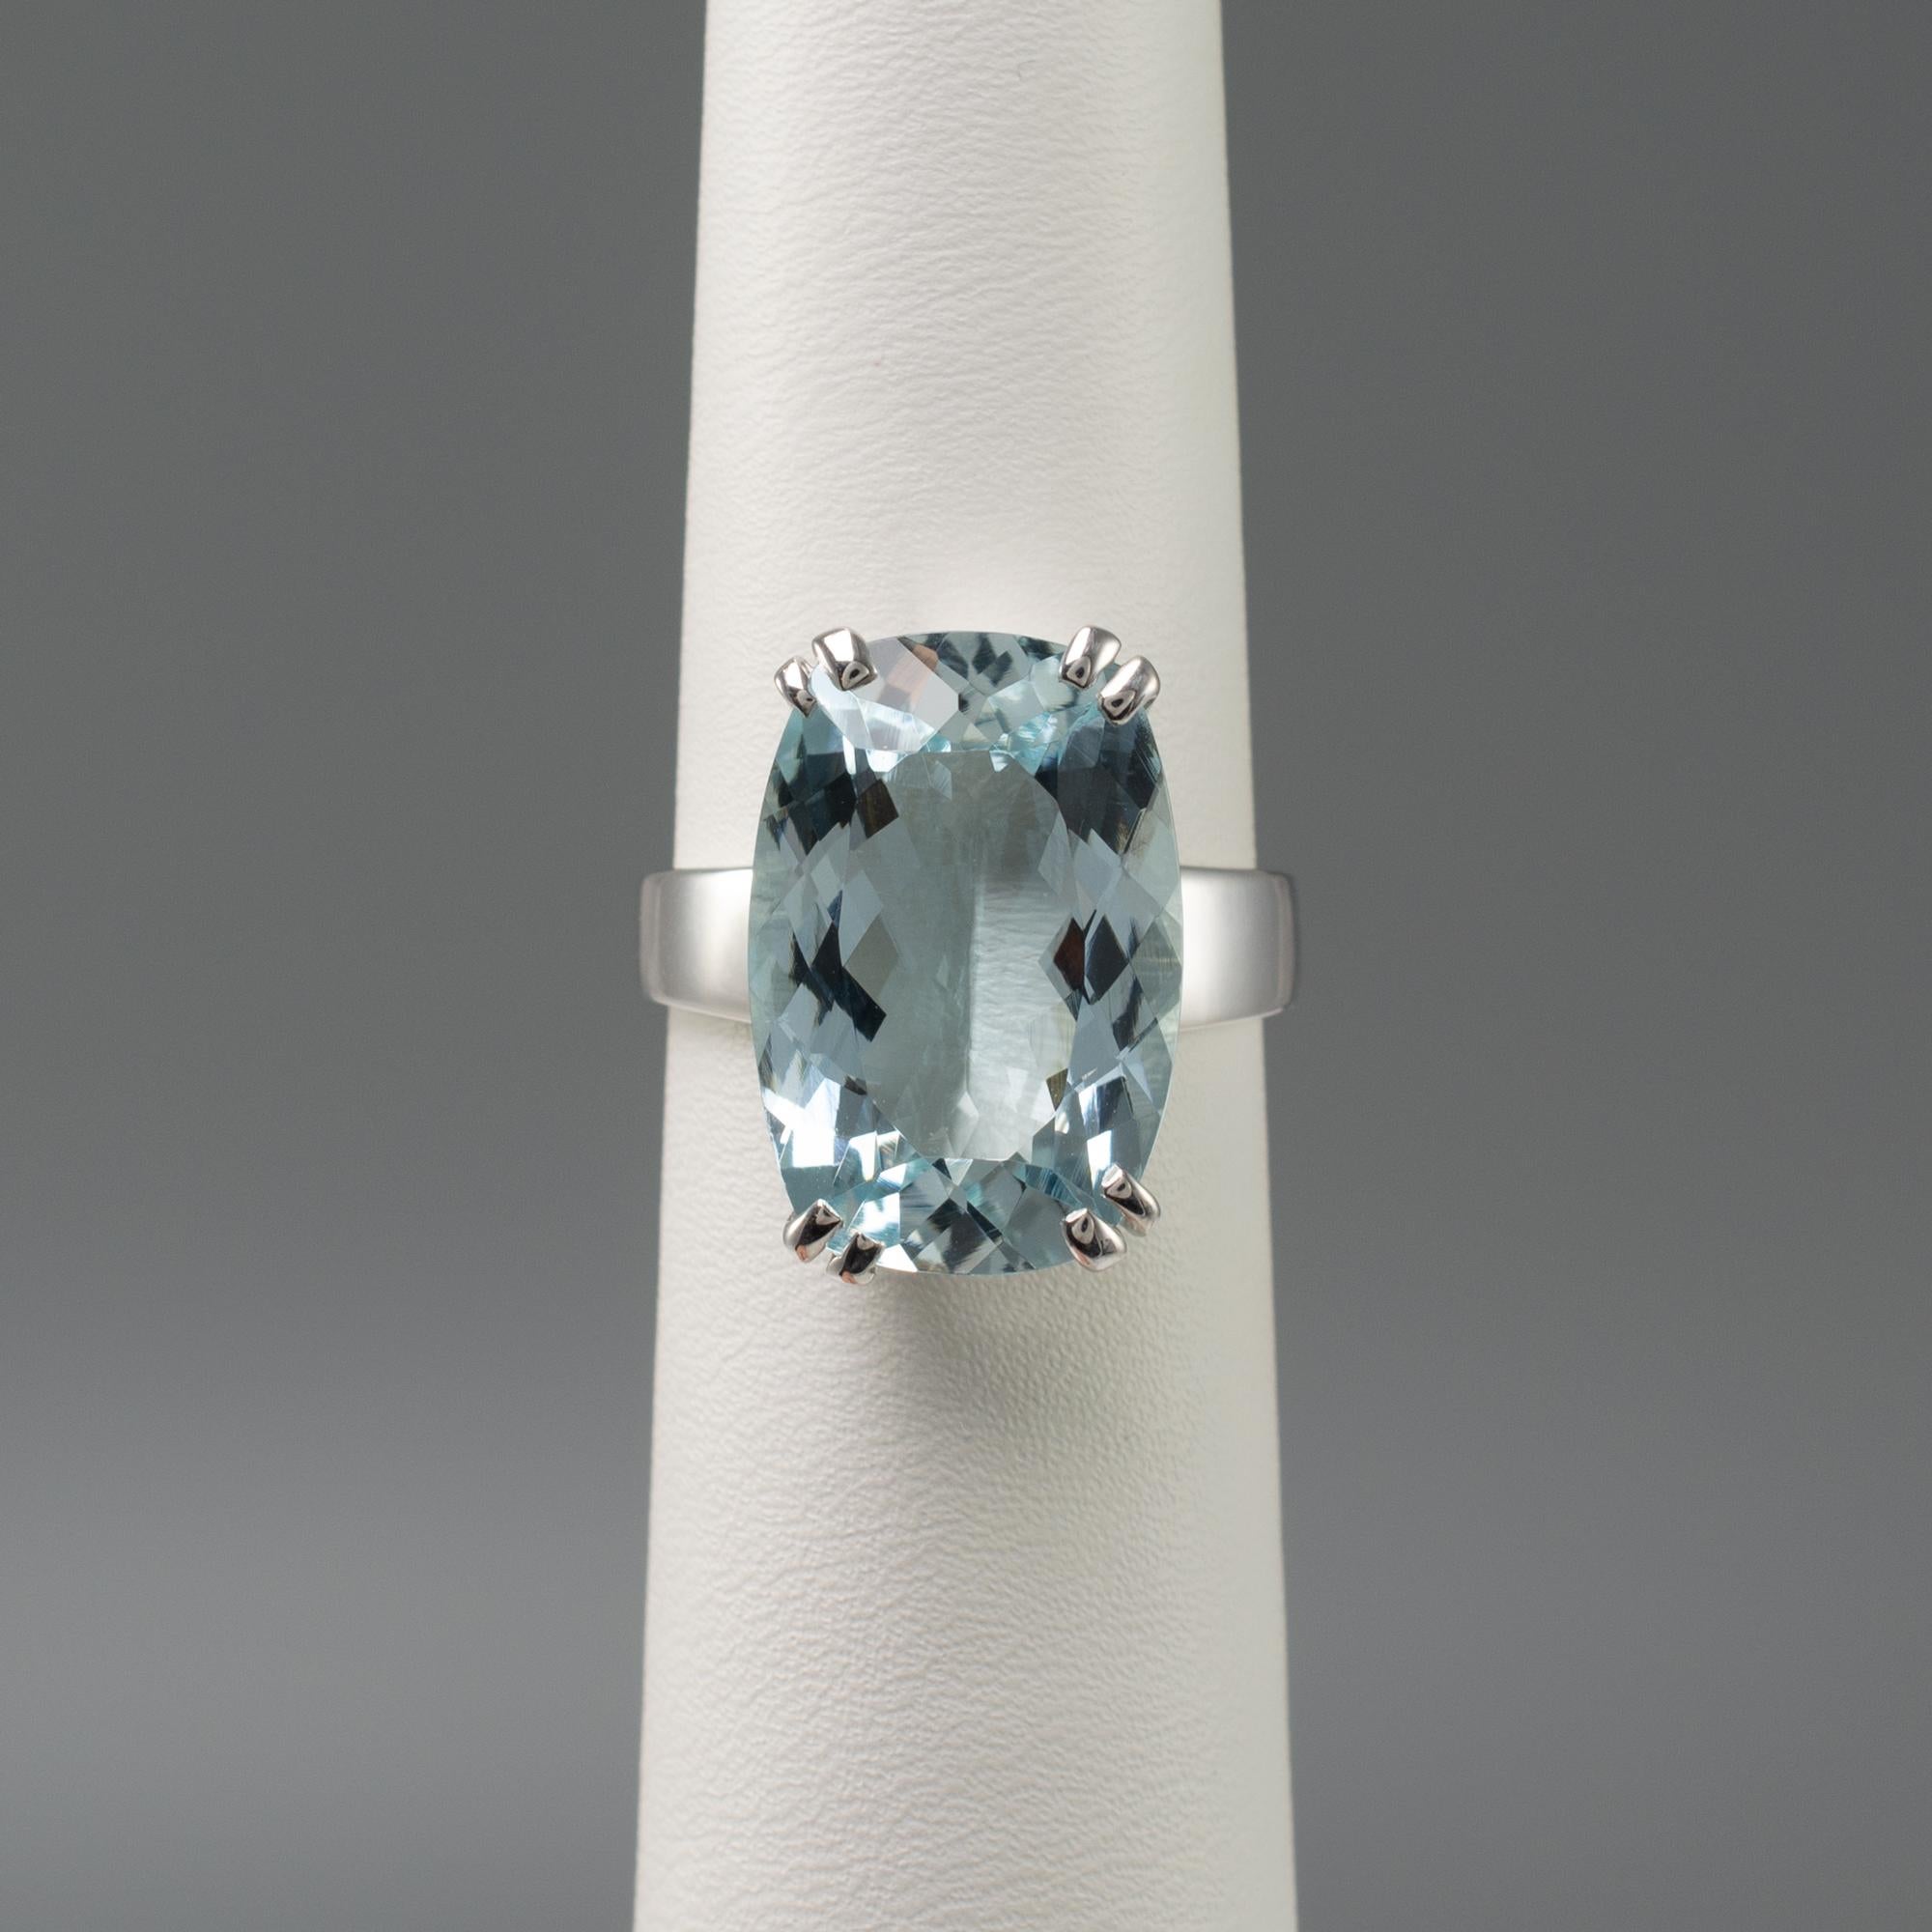 This fabulous aquamarine solitaire ring is crafted in 18 karat white gold and finished to the highest standards.

Featuring a truly mesmerizing stunning AAA quality gemstone is beautifully cut showing translucent colour-changing facets. The large